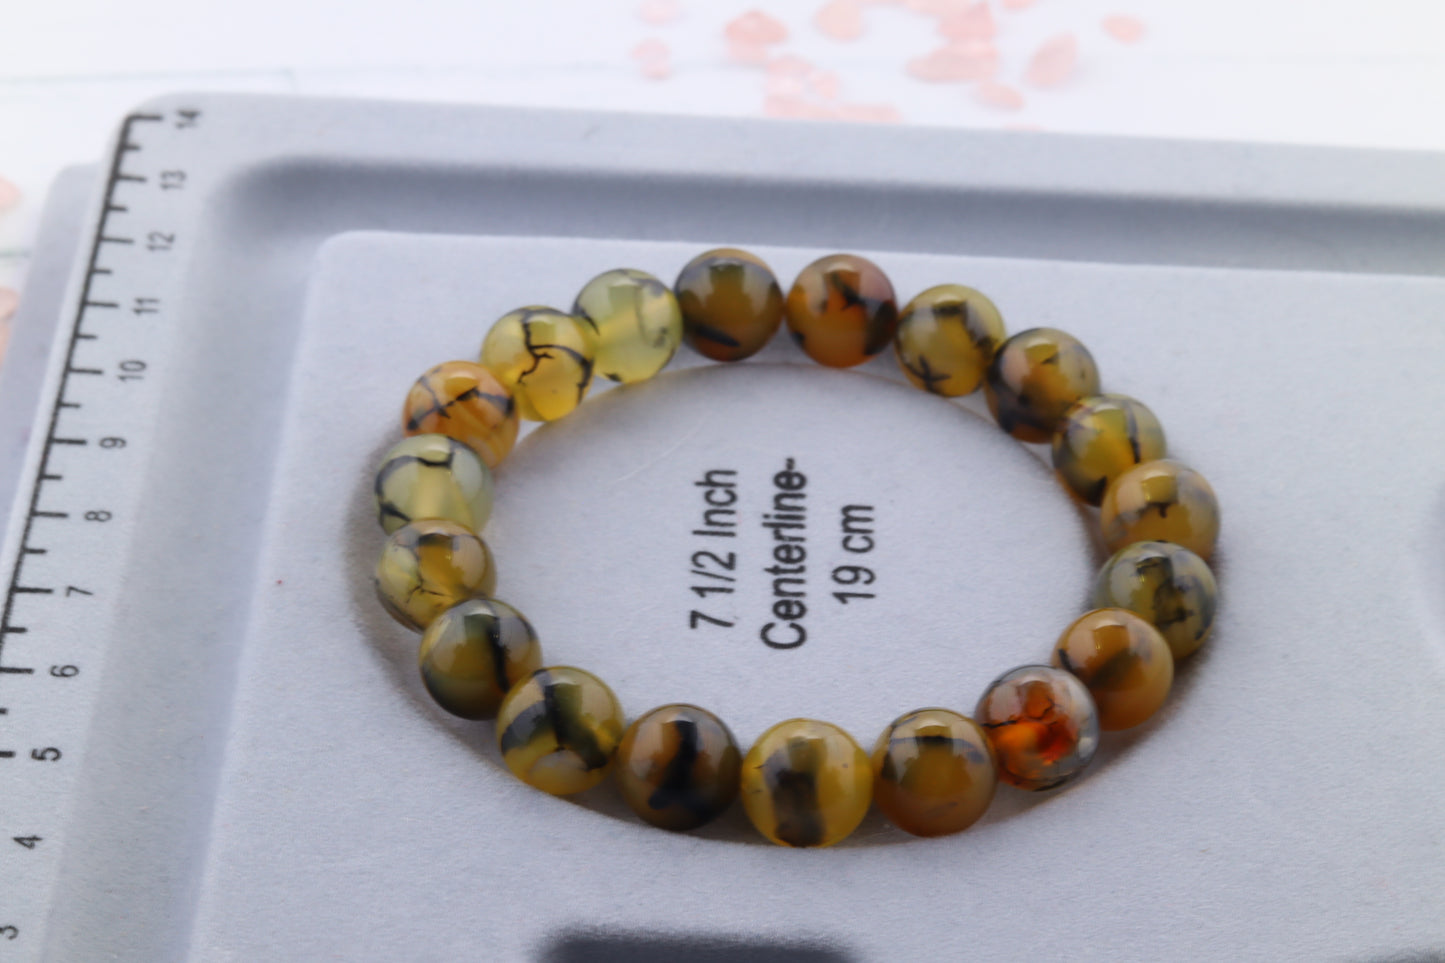 Handmade Dragon Agate Beaded Stretch Bracelet, Yellows and Browns, Neutral colors.